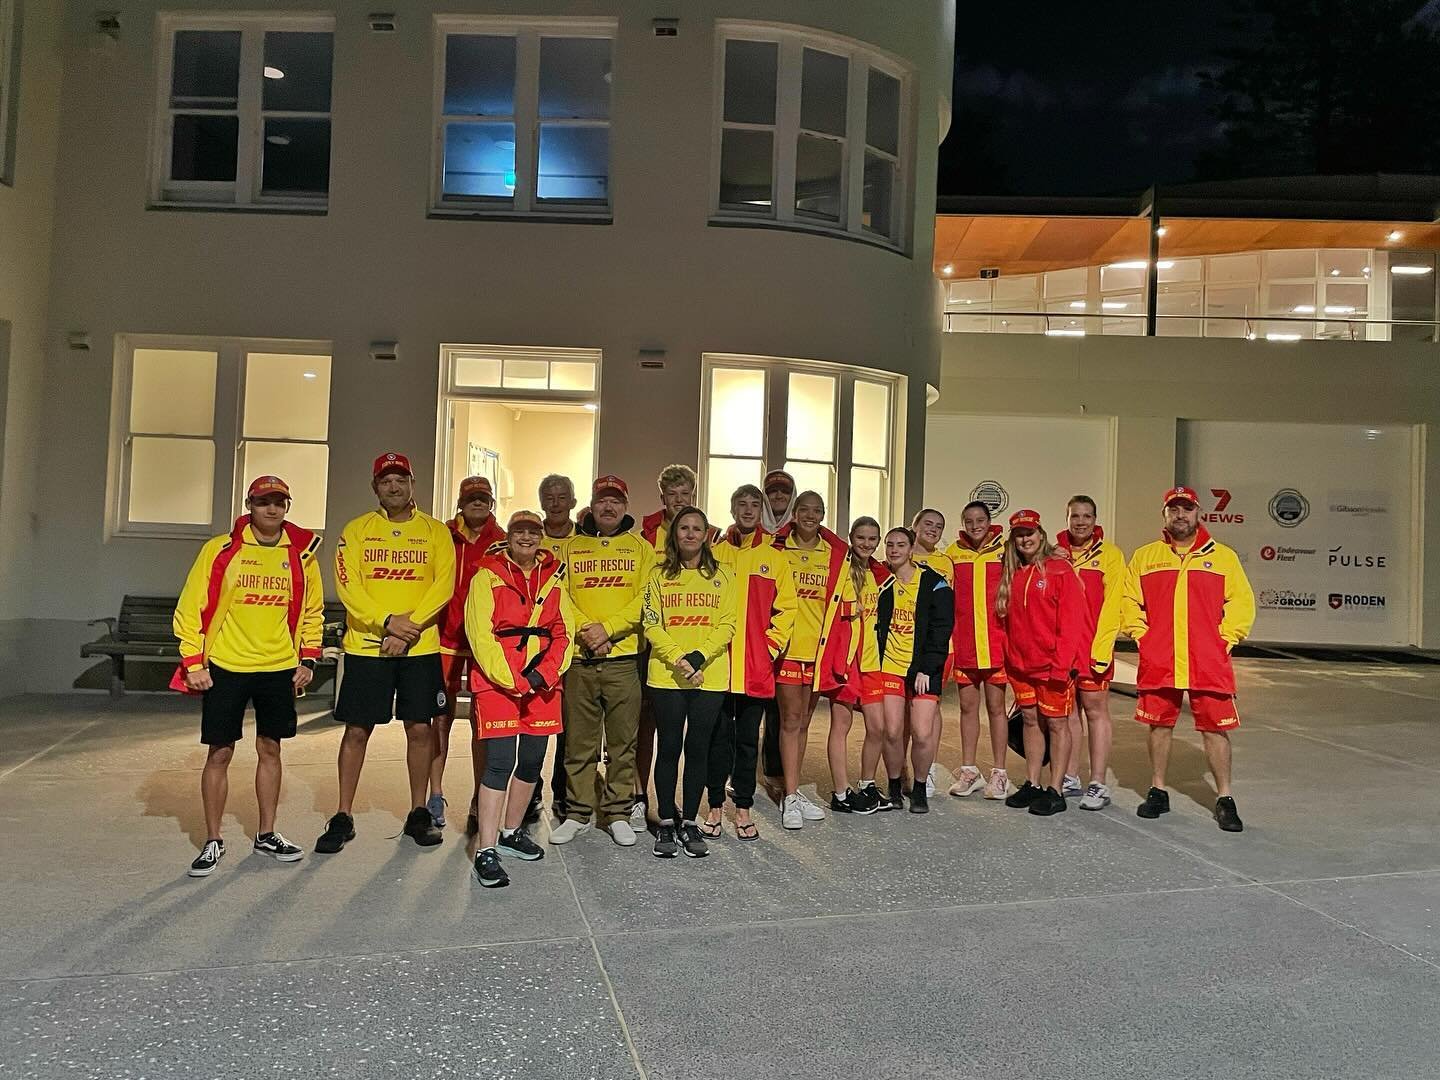 A big shout out to the @cronullaslsc crew, who provided first aid services this morning at the @cronullarslsb Cronulla Dawn Service. 💛💙

We were told that some not only dedicated their time at the service, they also went on to patrol for the remain